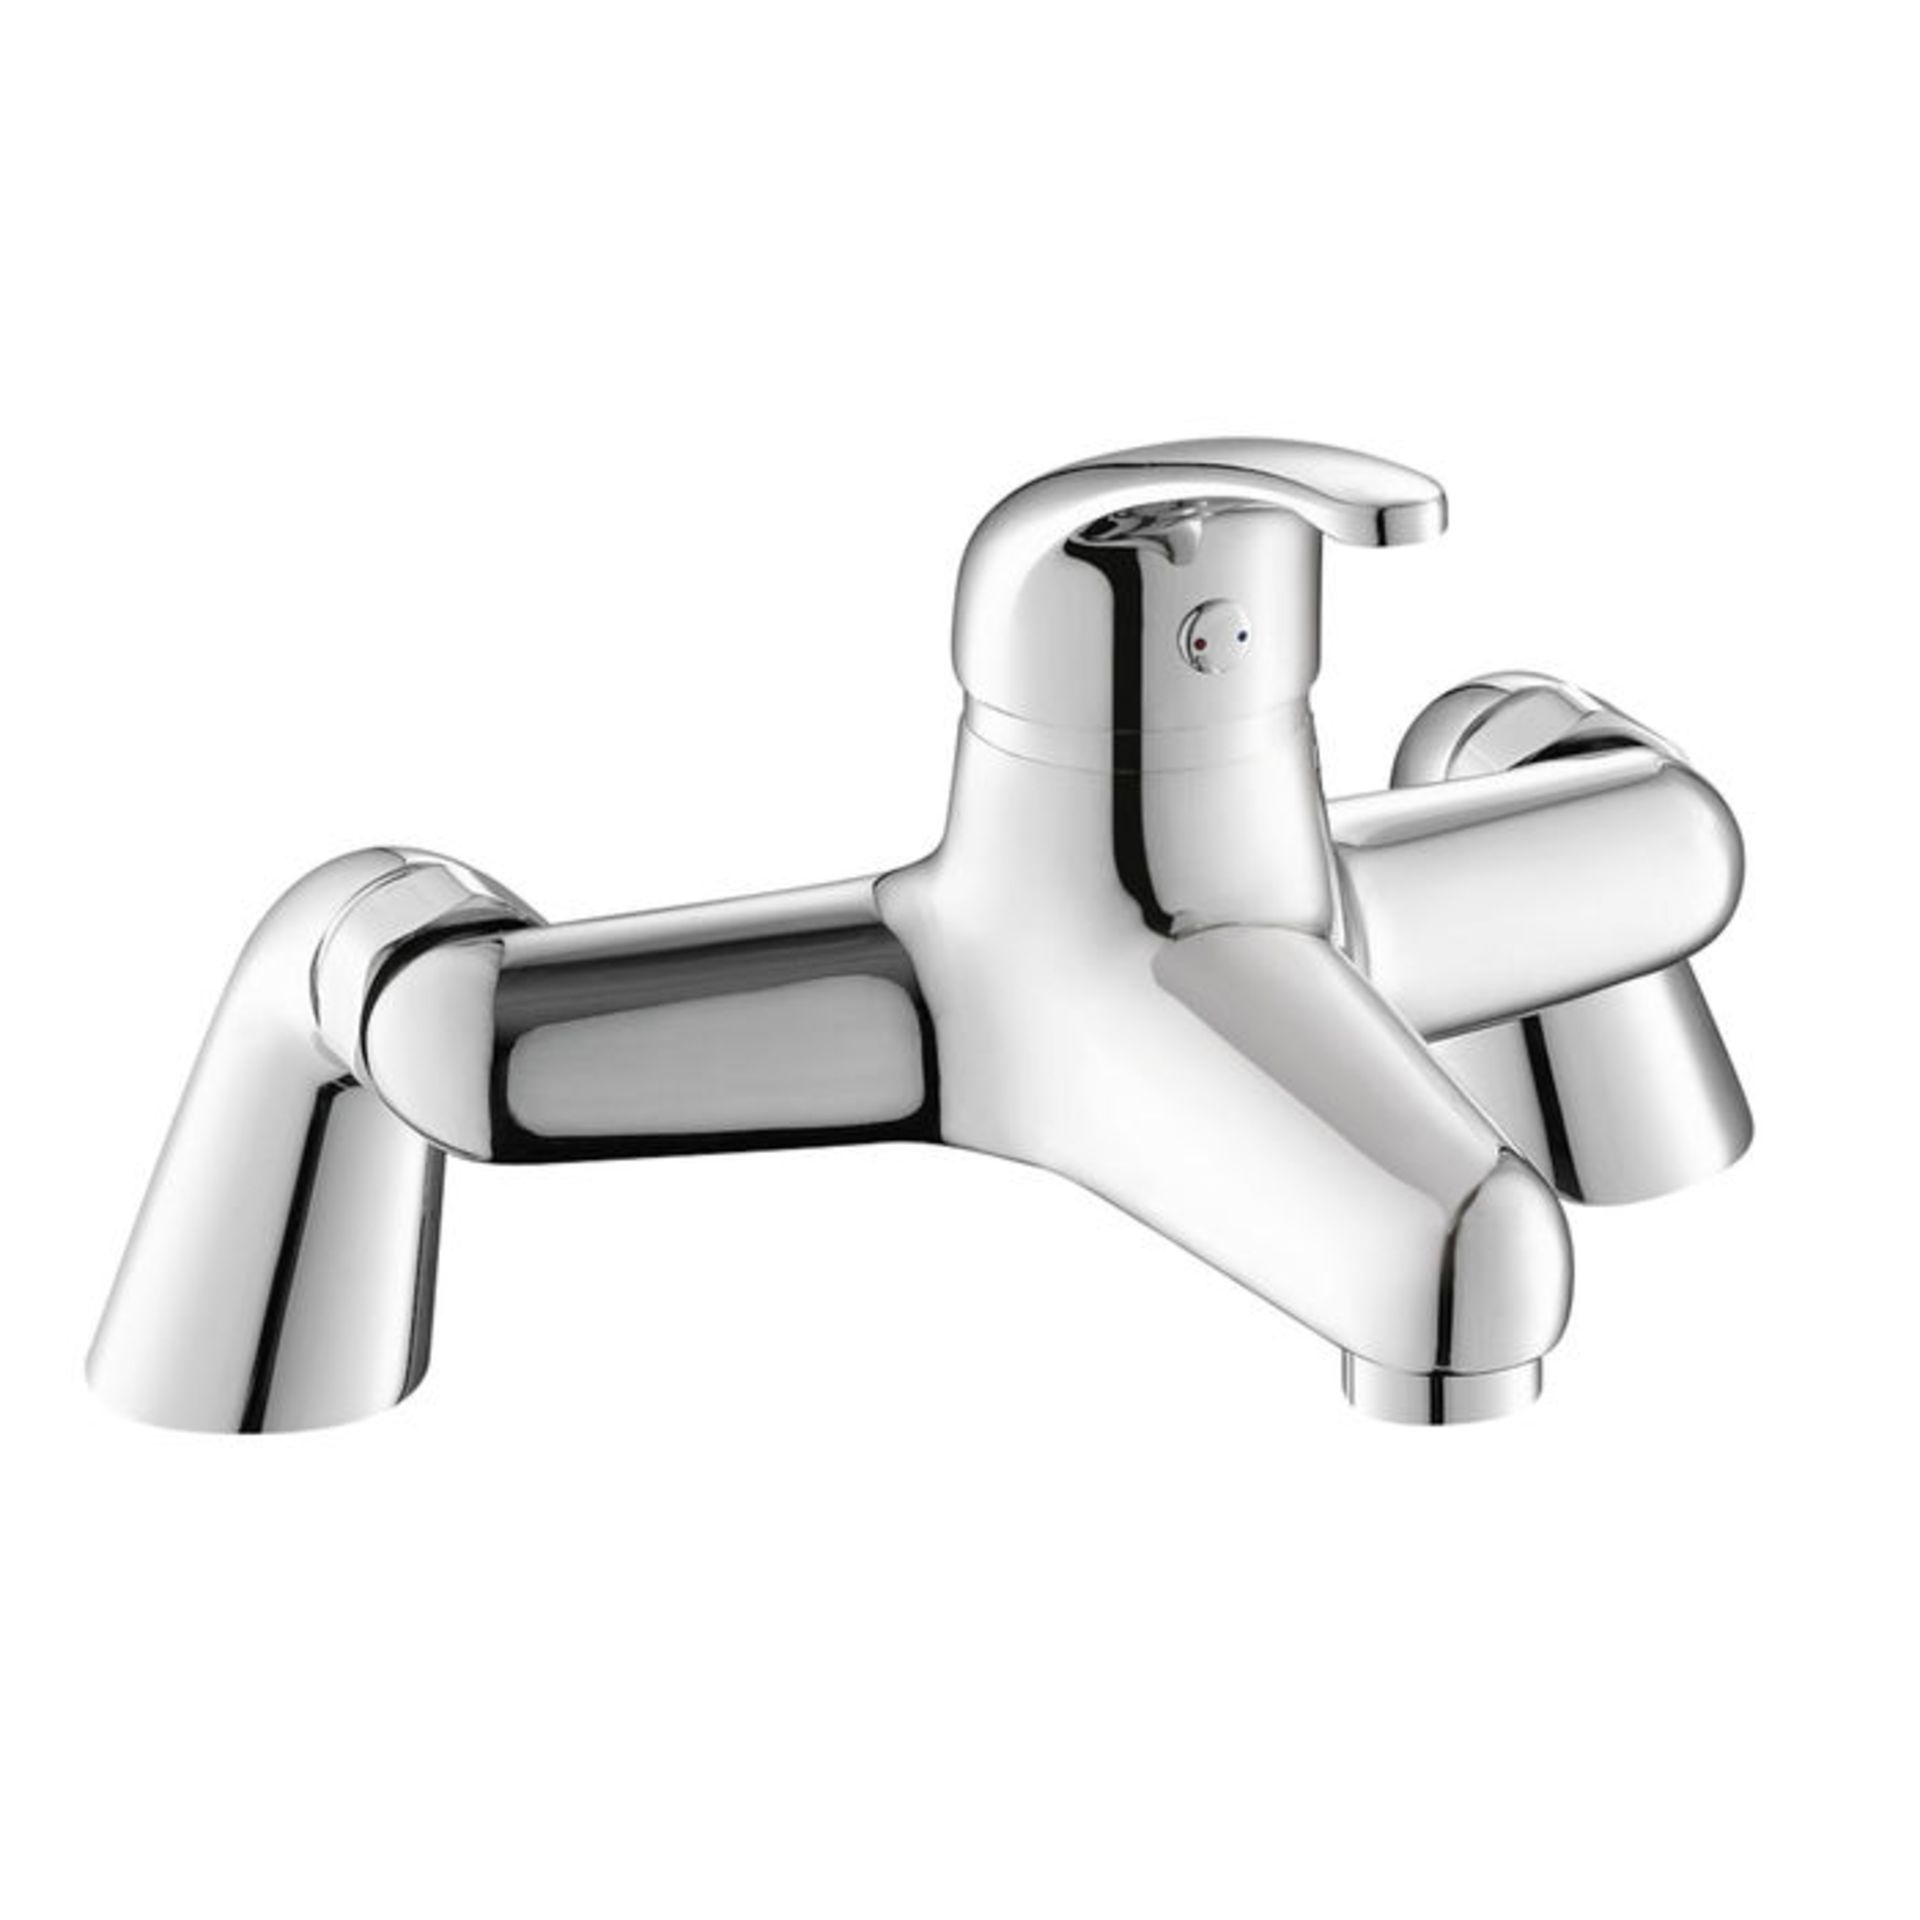 (LX7 ) Sleek Bath Filler Mixer Tap Chrome Plated Solid Brass 1/4 turn solid brass valve with ceramic